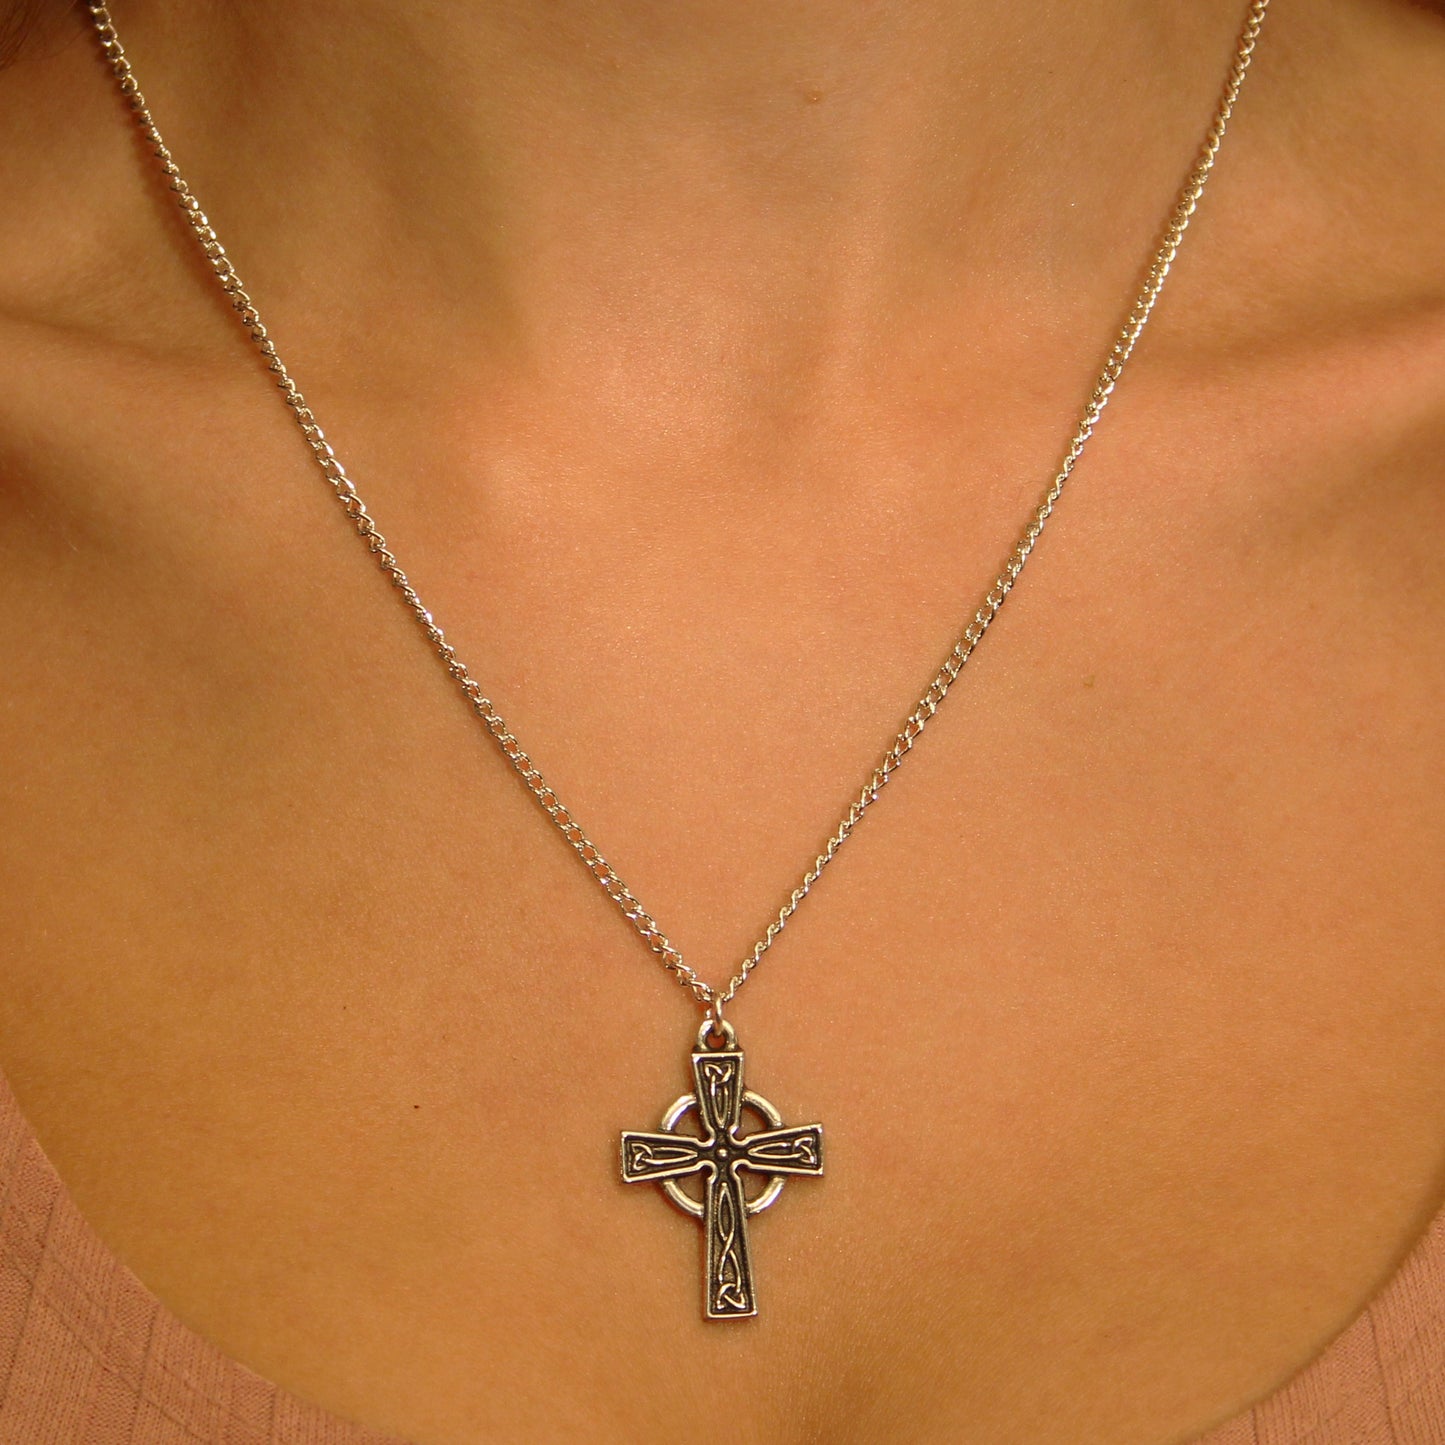 Pewter Celtic Cross Necklace (XN37)